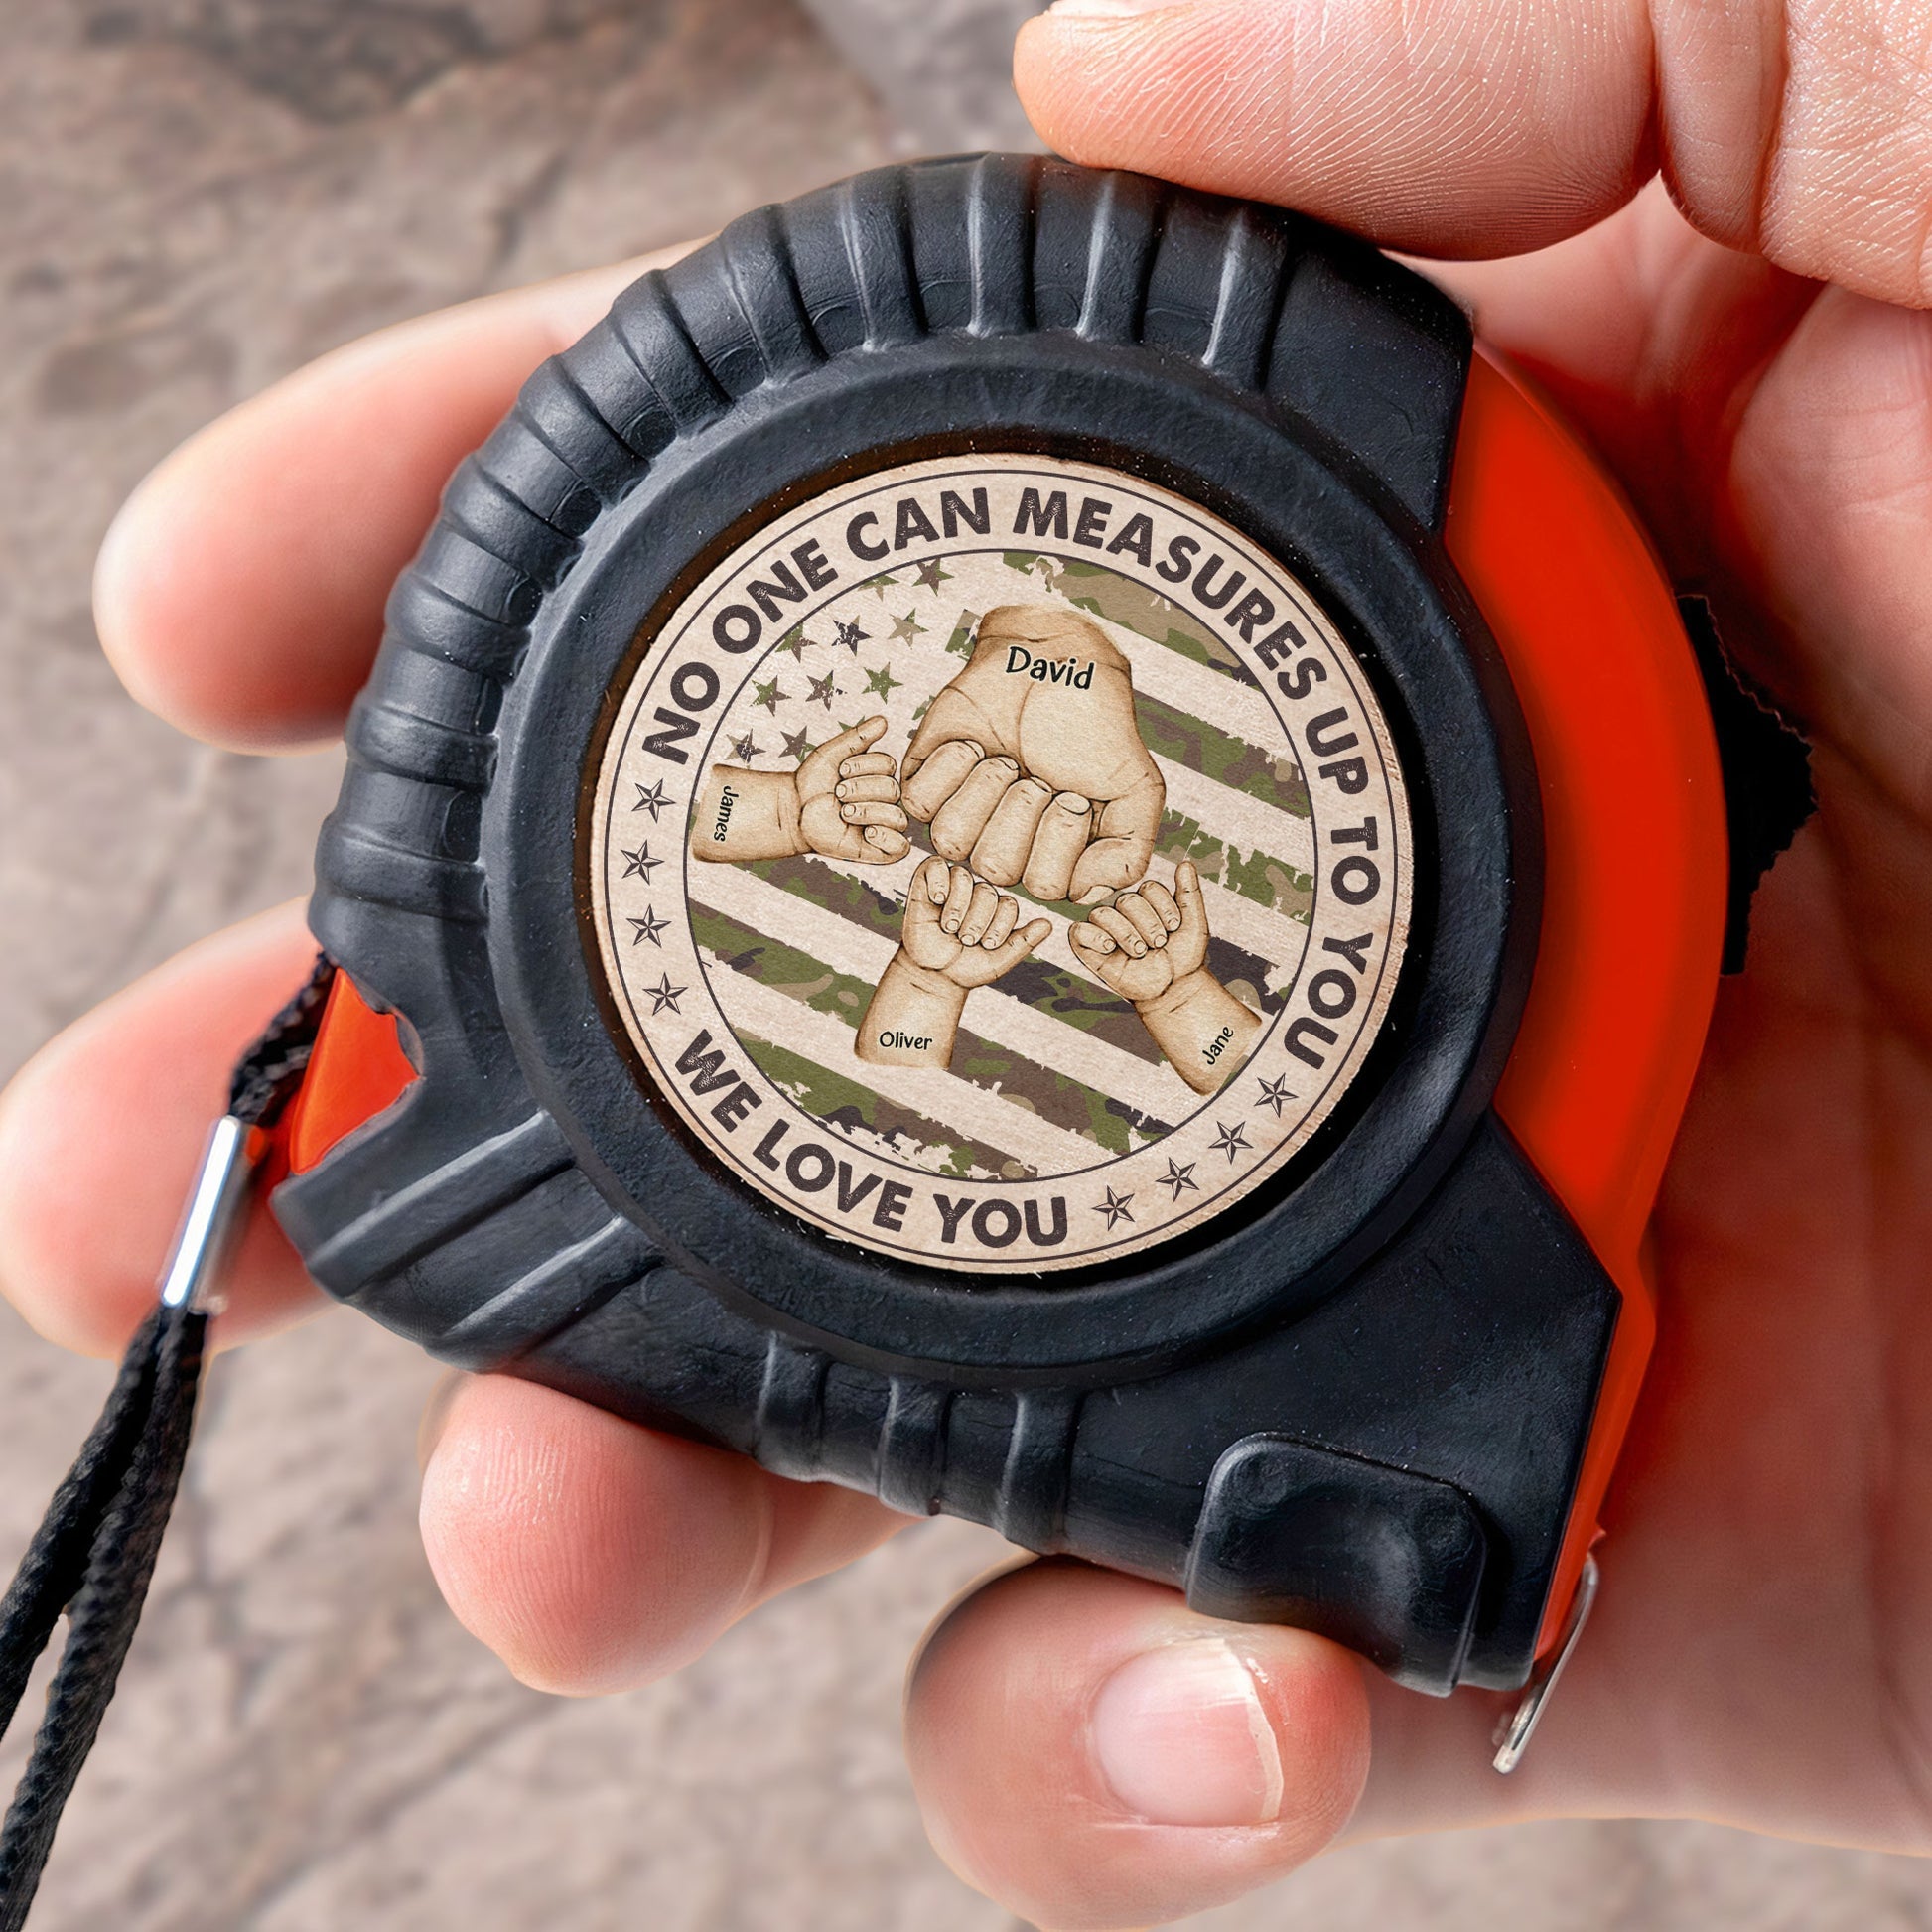 No One Can Measures Up To You - Personalized Tape Measure